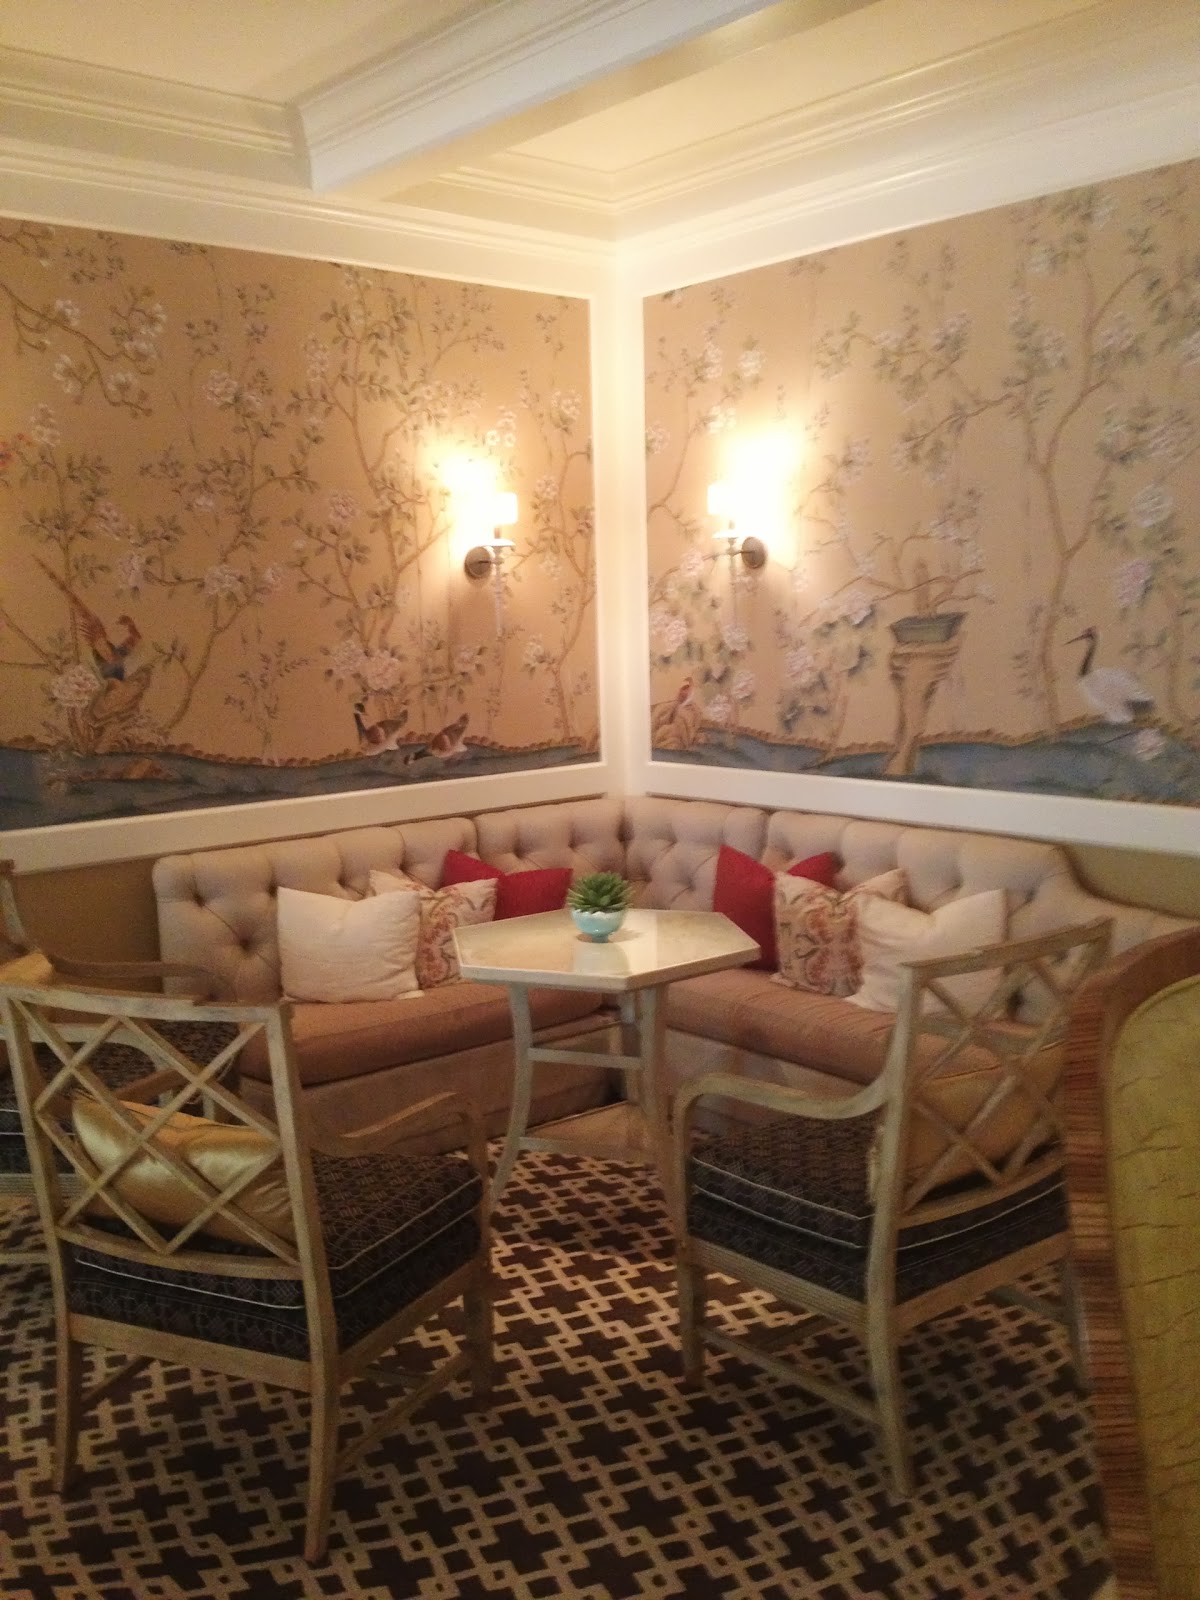 de Gournay wallpaper in the lobby living room (via my iPhone)